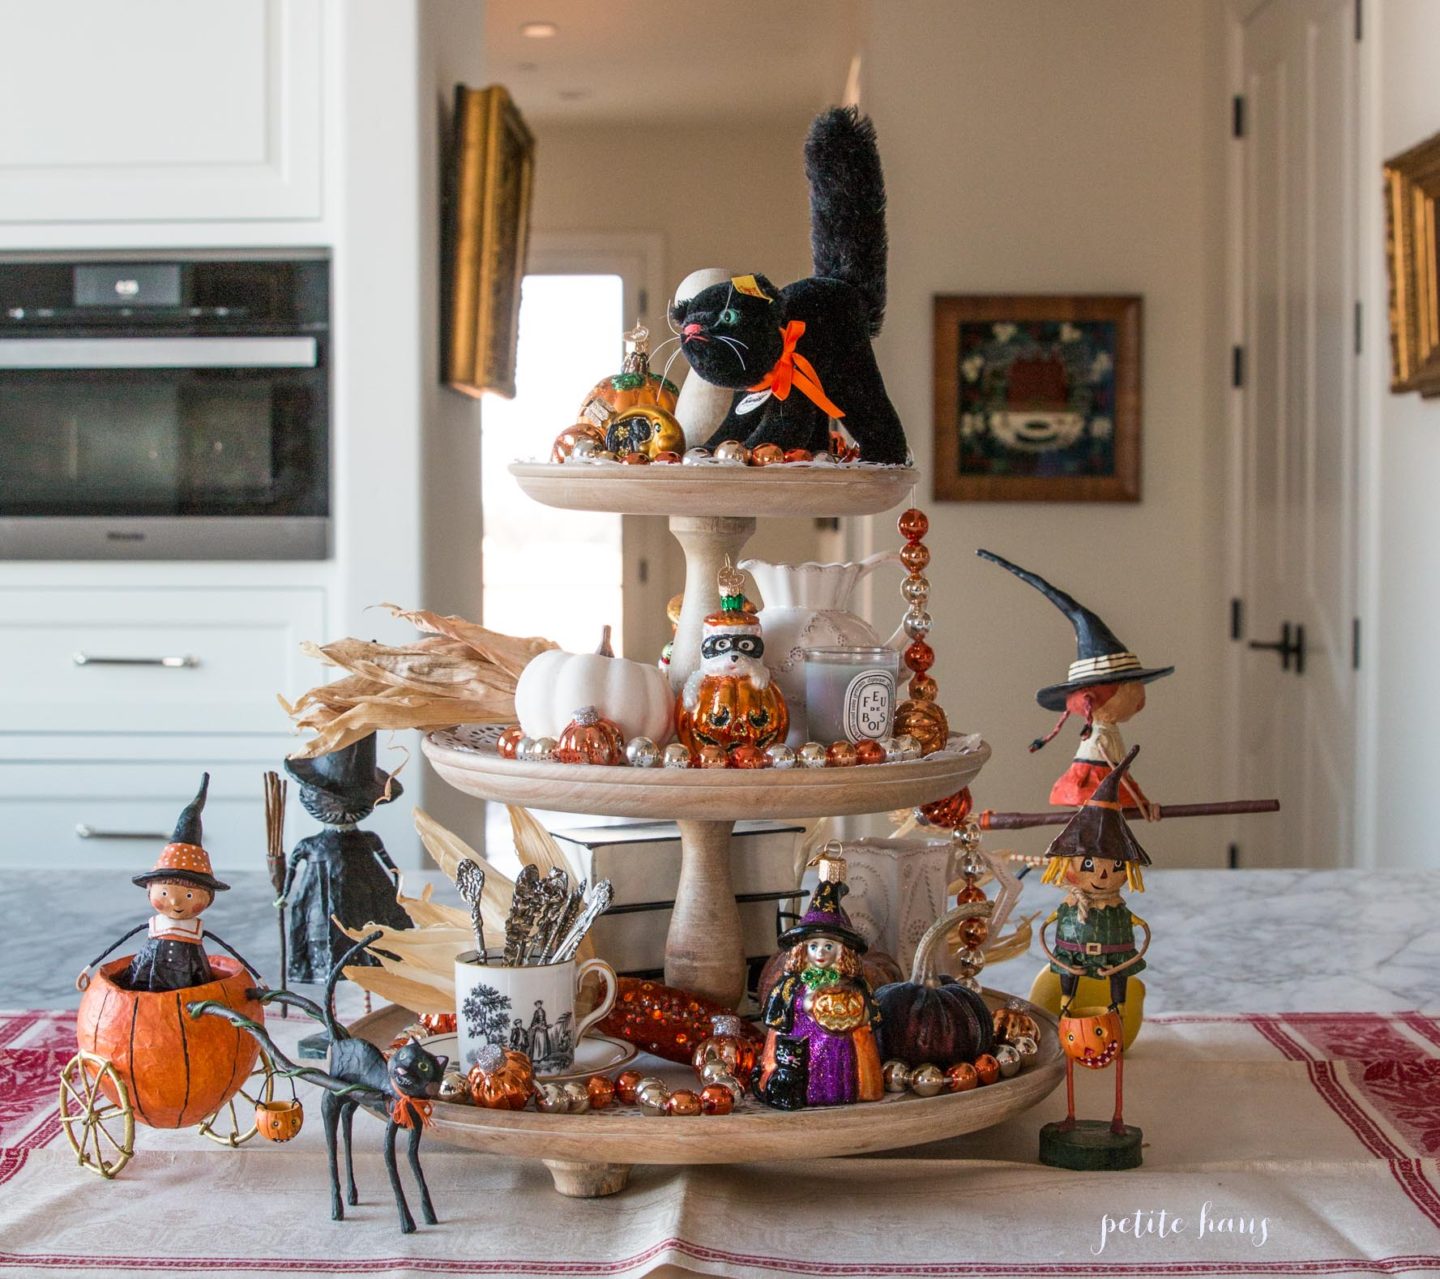 Halloween Tiered Tray - Styling and decorating a tiered tray for Halloween. #halloweendecor #halloweendecorating 